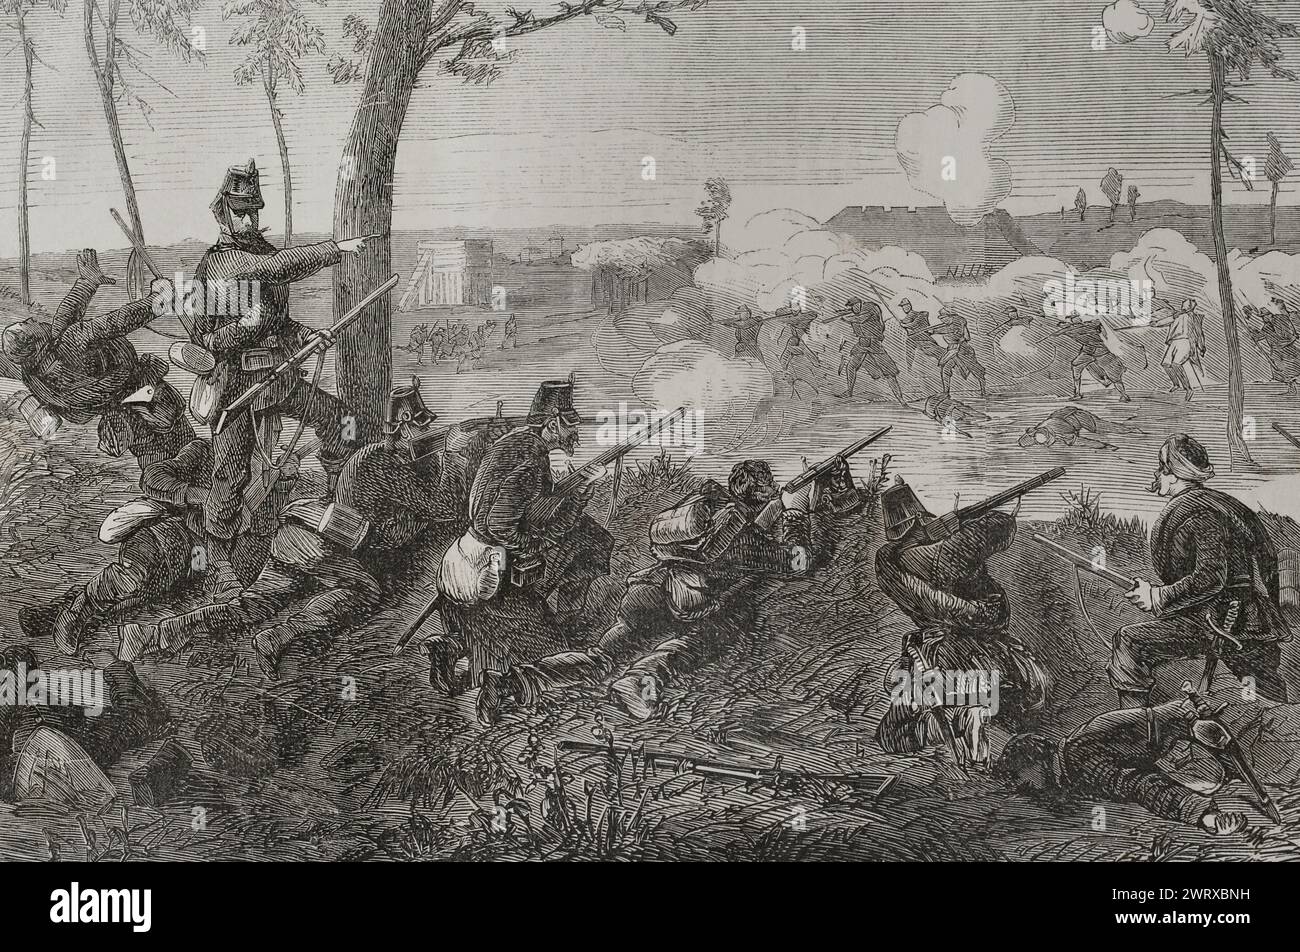 Franco-Prussian War (1870-1871). Siege of Paris (19 September 1870 to 28 January 1871). Skirmishes between the Prussian outposts encircling Paris and the besieged. Engraving by Capuz. 'Historia de la Guerra de Francia y Prusia' (History of the War between France and Prussia). Volume II. Published in Barcelona, 1871. Stock Photo